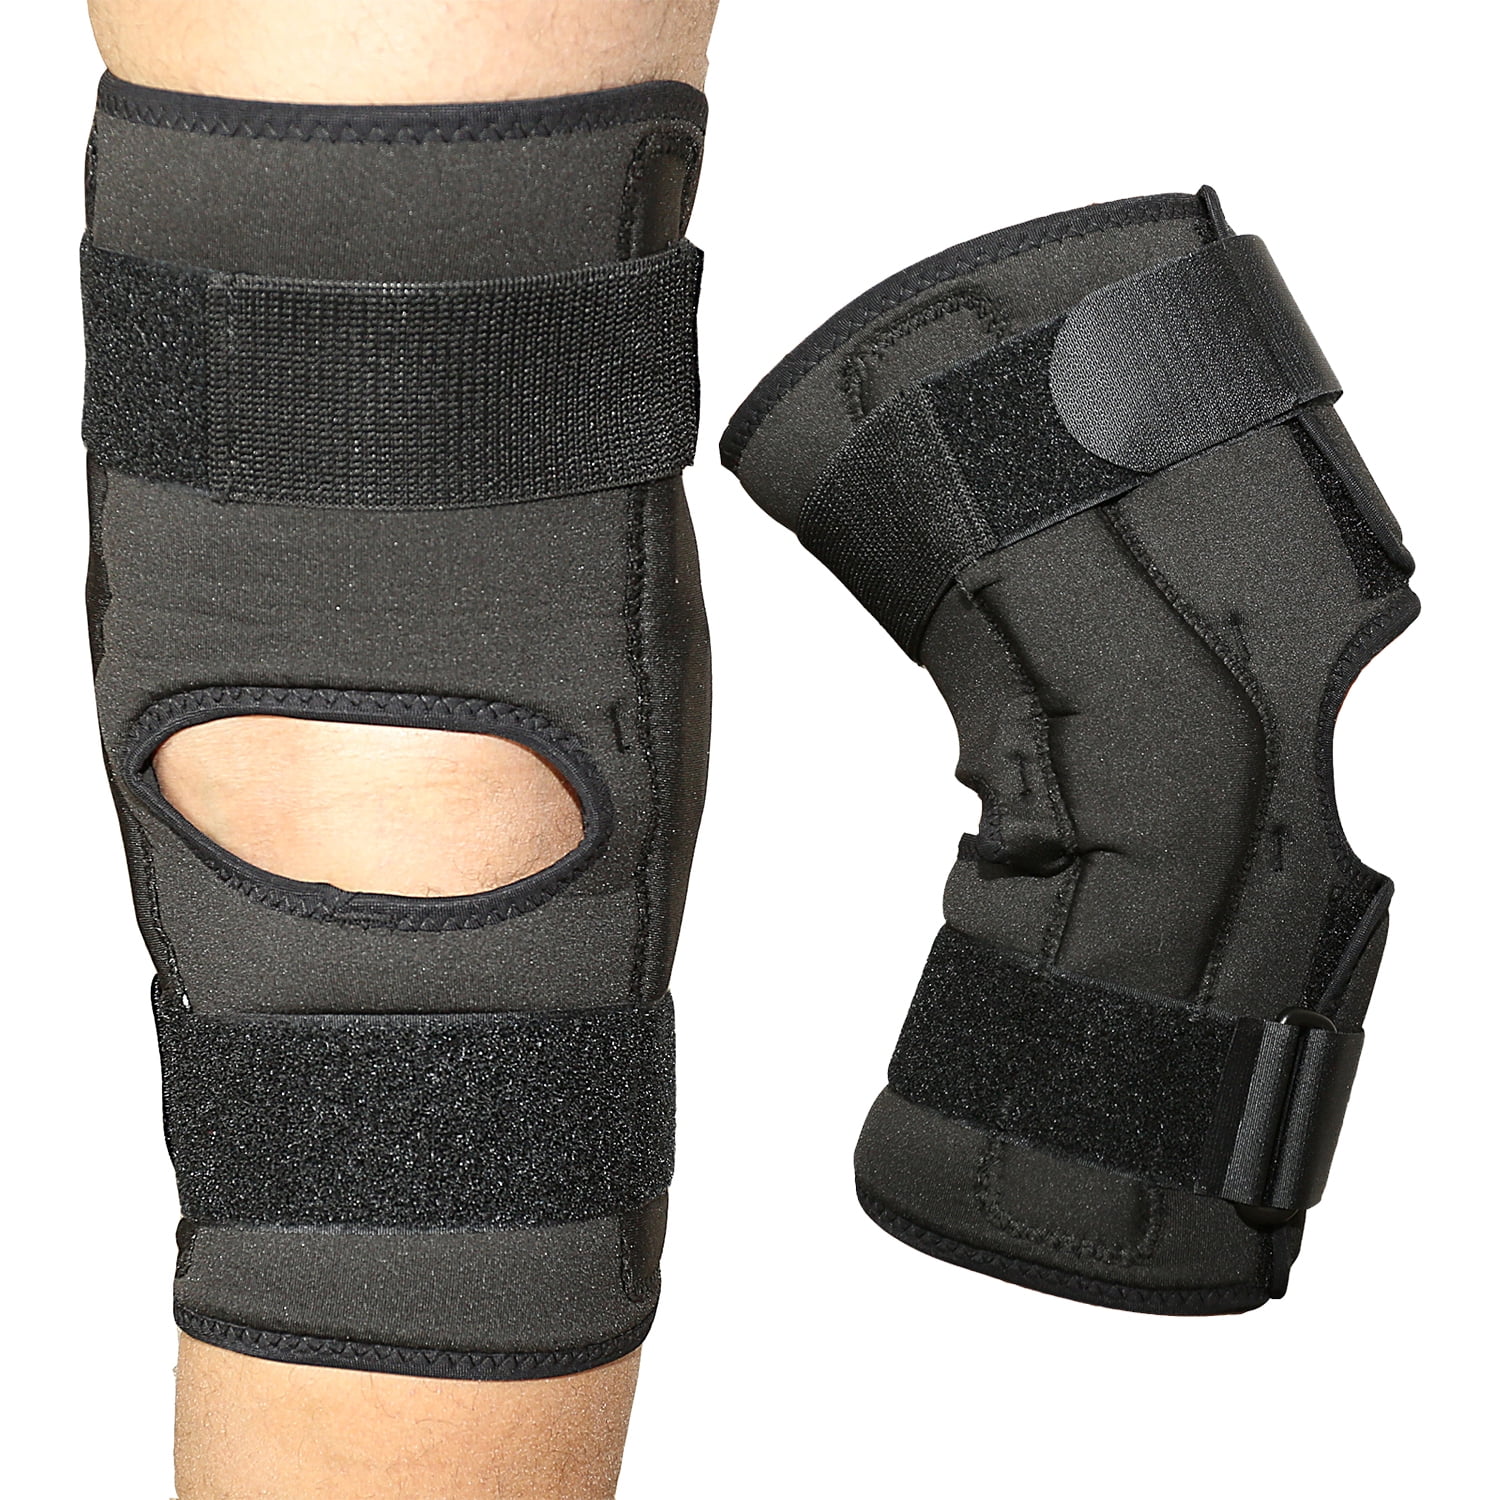 Hinged Knee Support Wrap-Around, Buy Now